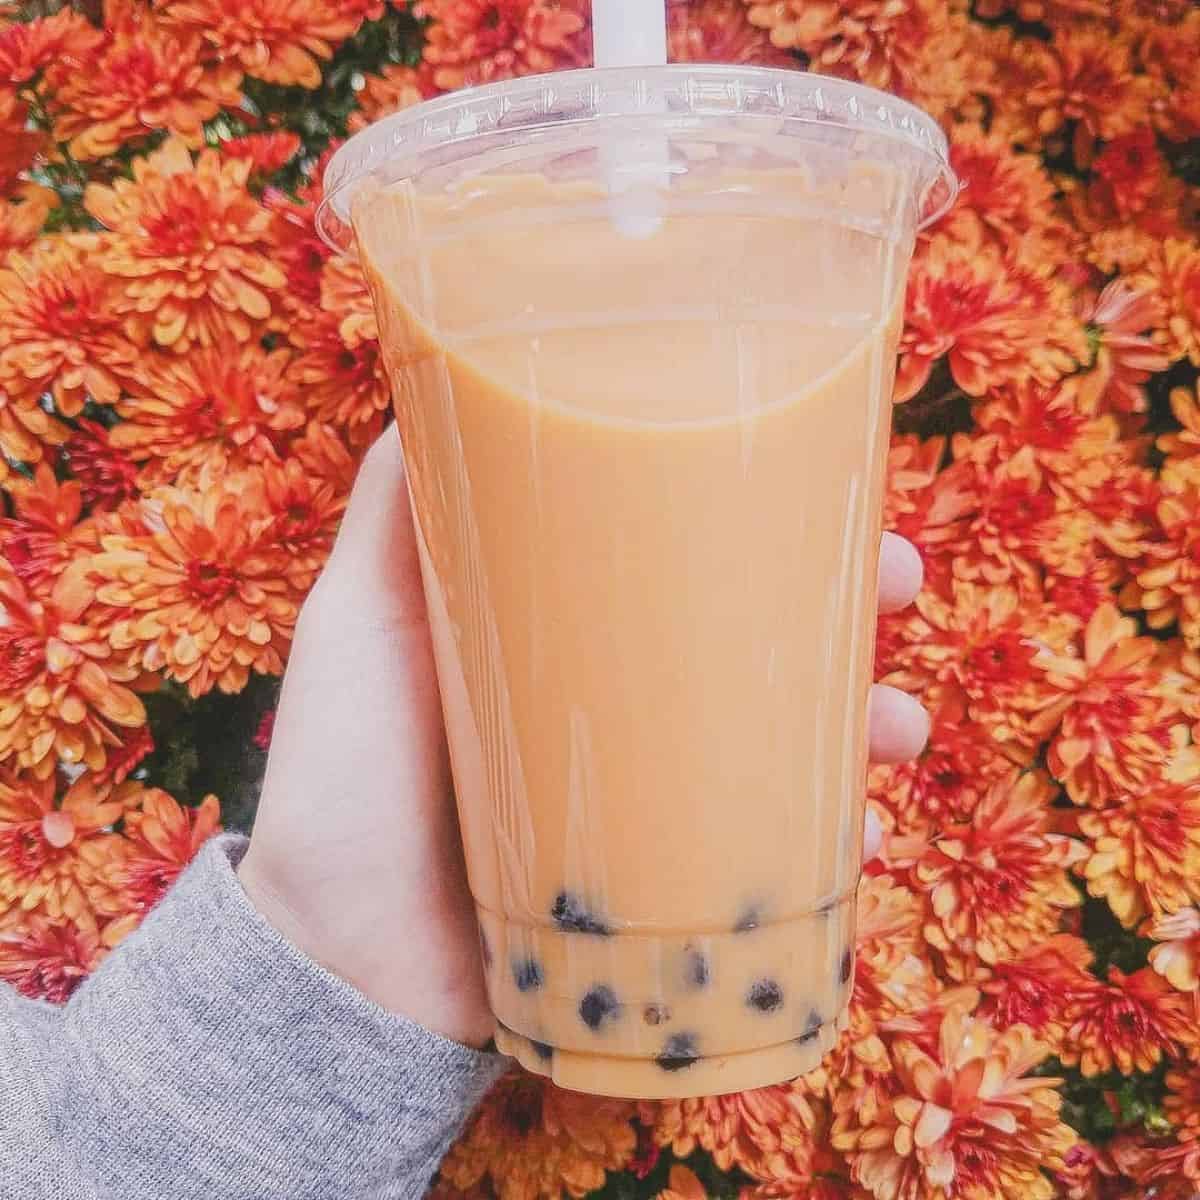 Boba drink with tapioca pearls with flowers in the background